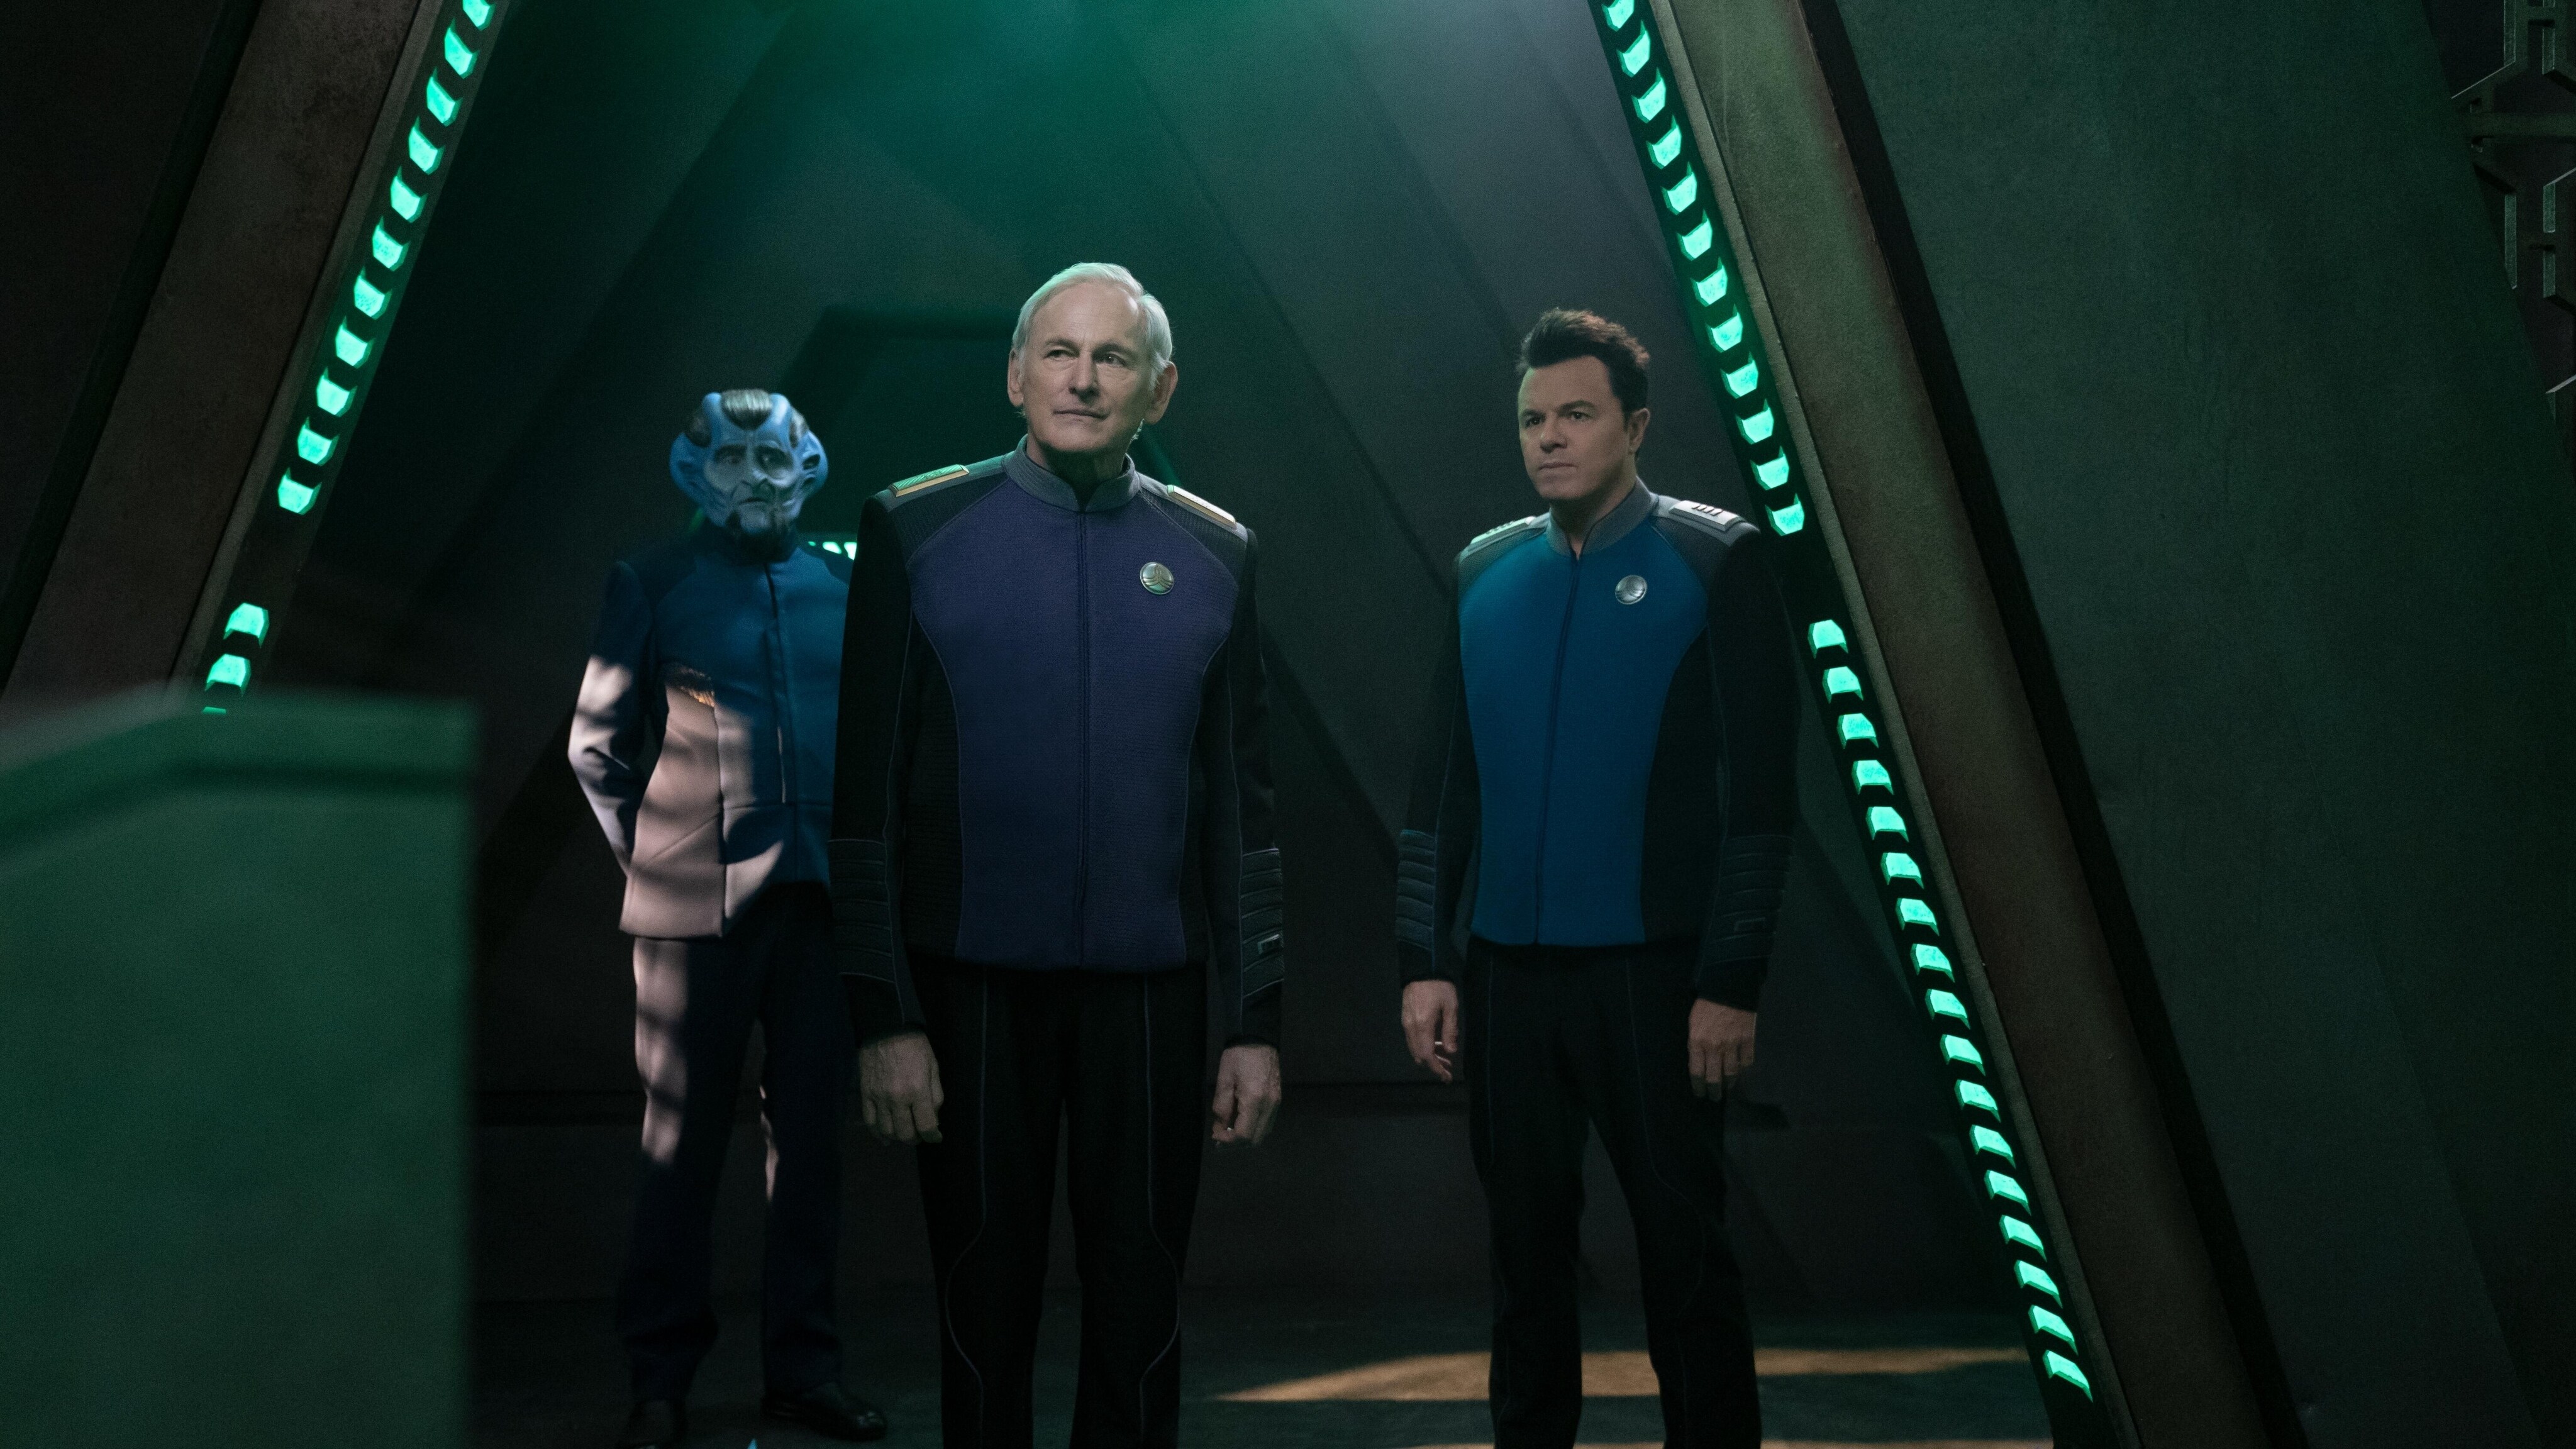 The Orville: New Horizons -- “Gently Falling Rain” - Episode 304 -- The Orville crew leads a Union delegation to sign a peace treaty with the Krill. President Alcuzan (Bruce Boxleitner), Admiral Halsey (Victor Garber), and Capt. Ed Mercer (Seth MacFarlane), shown. (Photo by: Michael Desmond/Hulu)